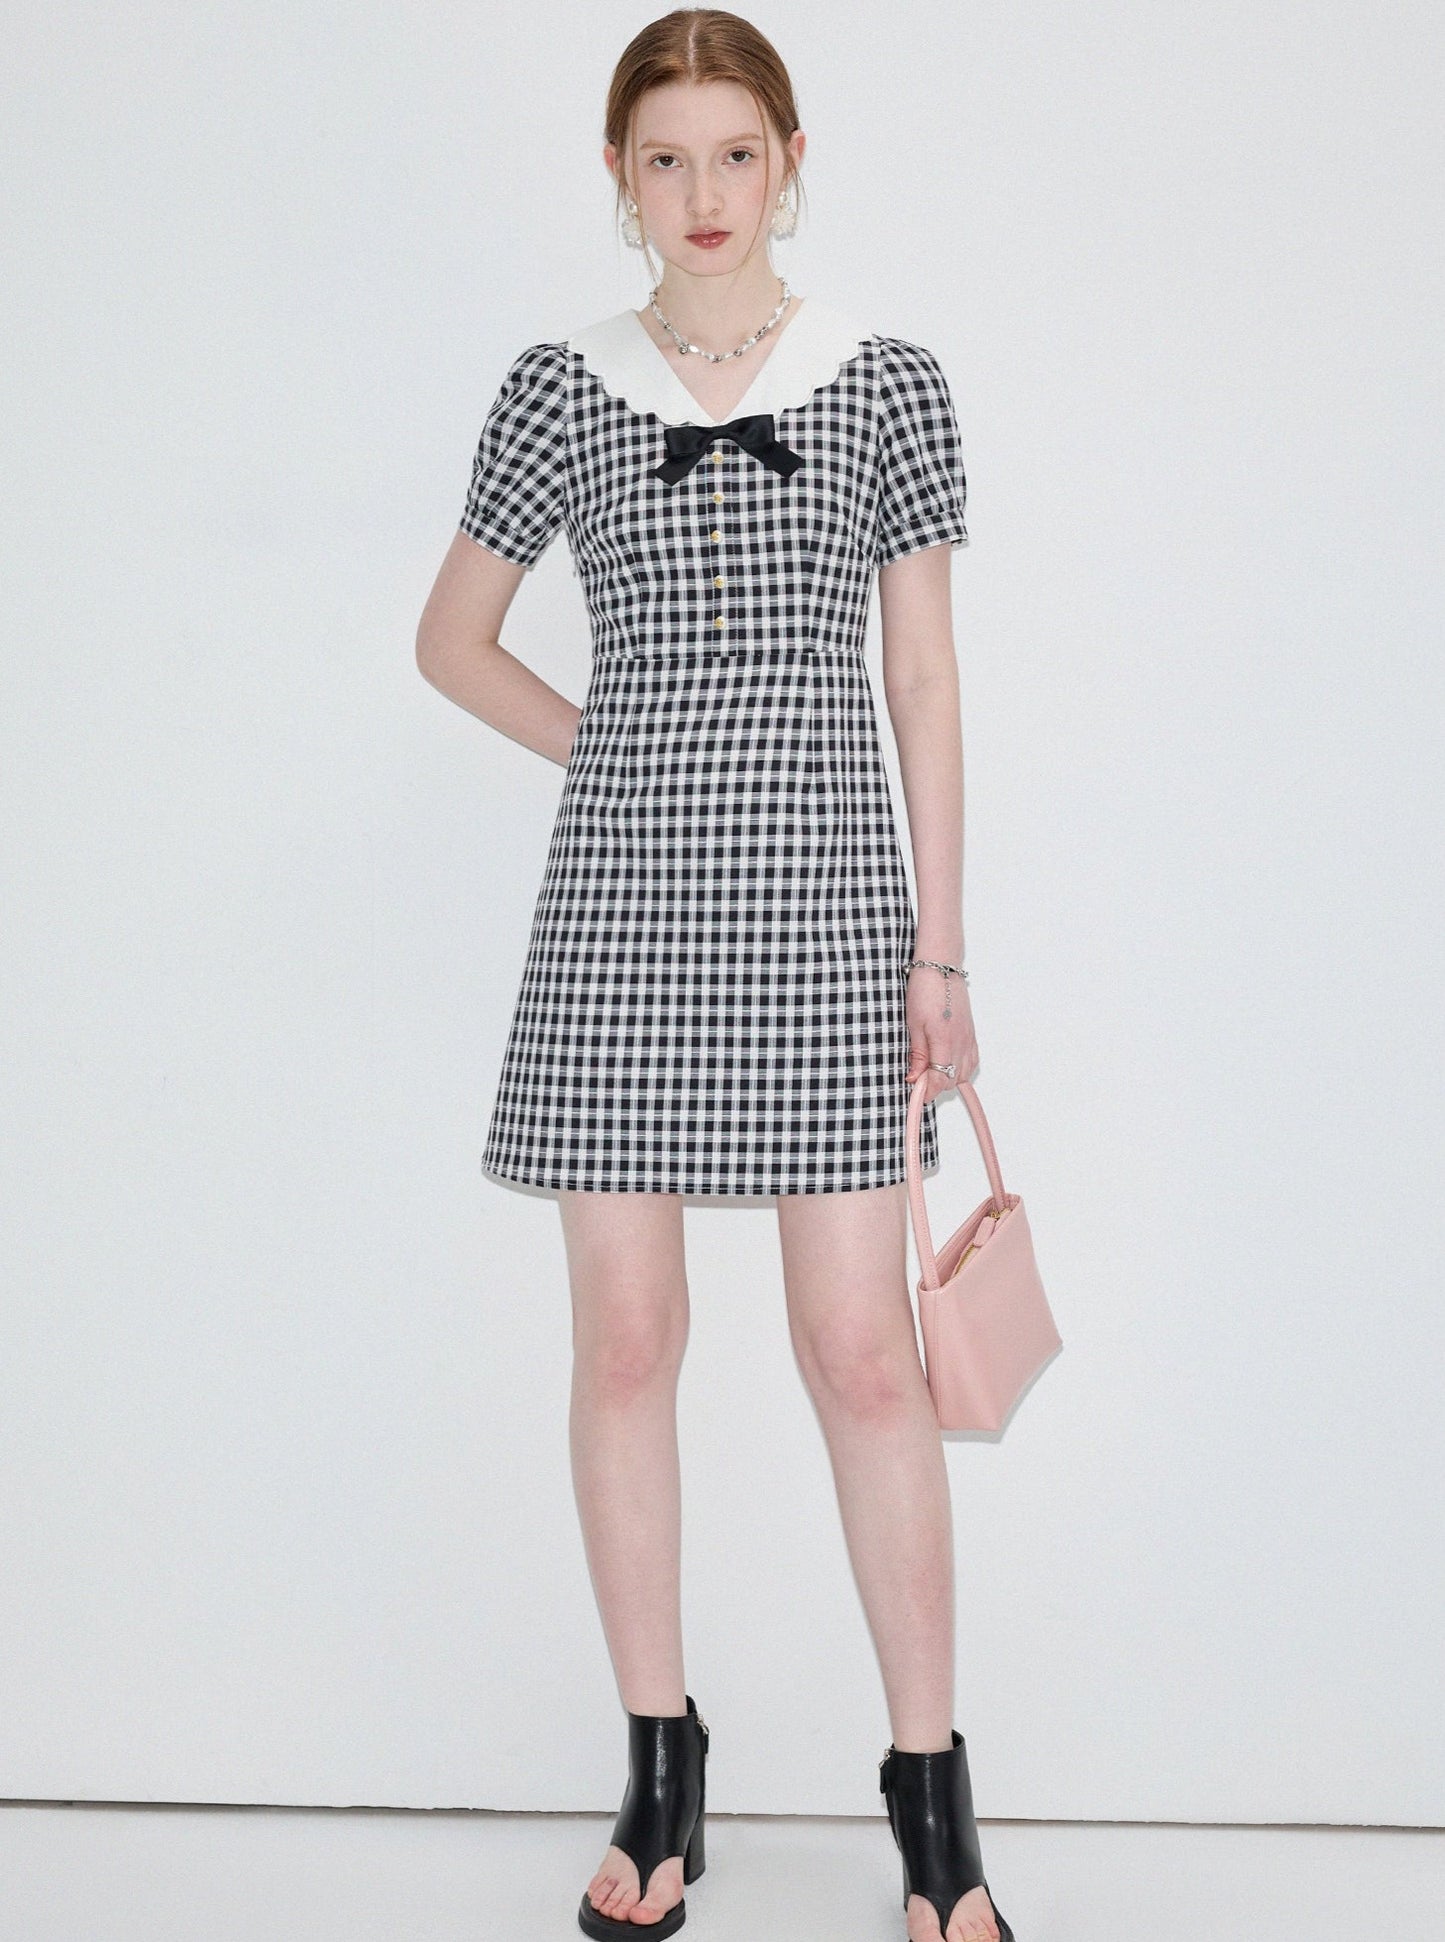 College Style Doll Neck Plaid Dress